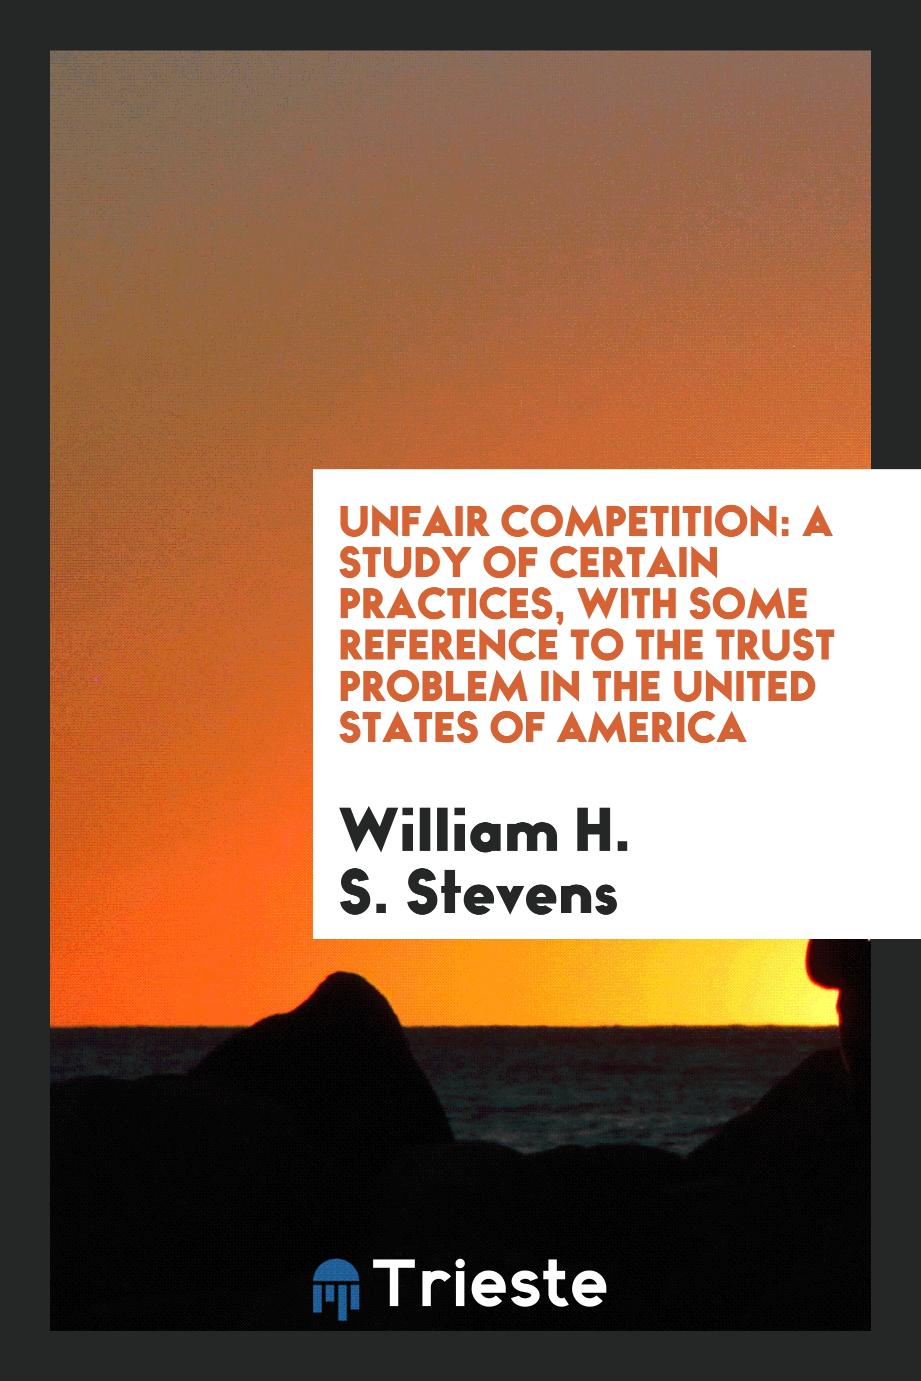 Unfair competition: a study of certain practices, with some reference to the trust problem in the United States of America